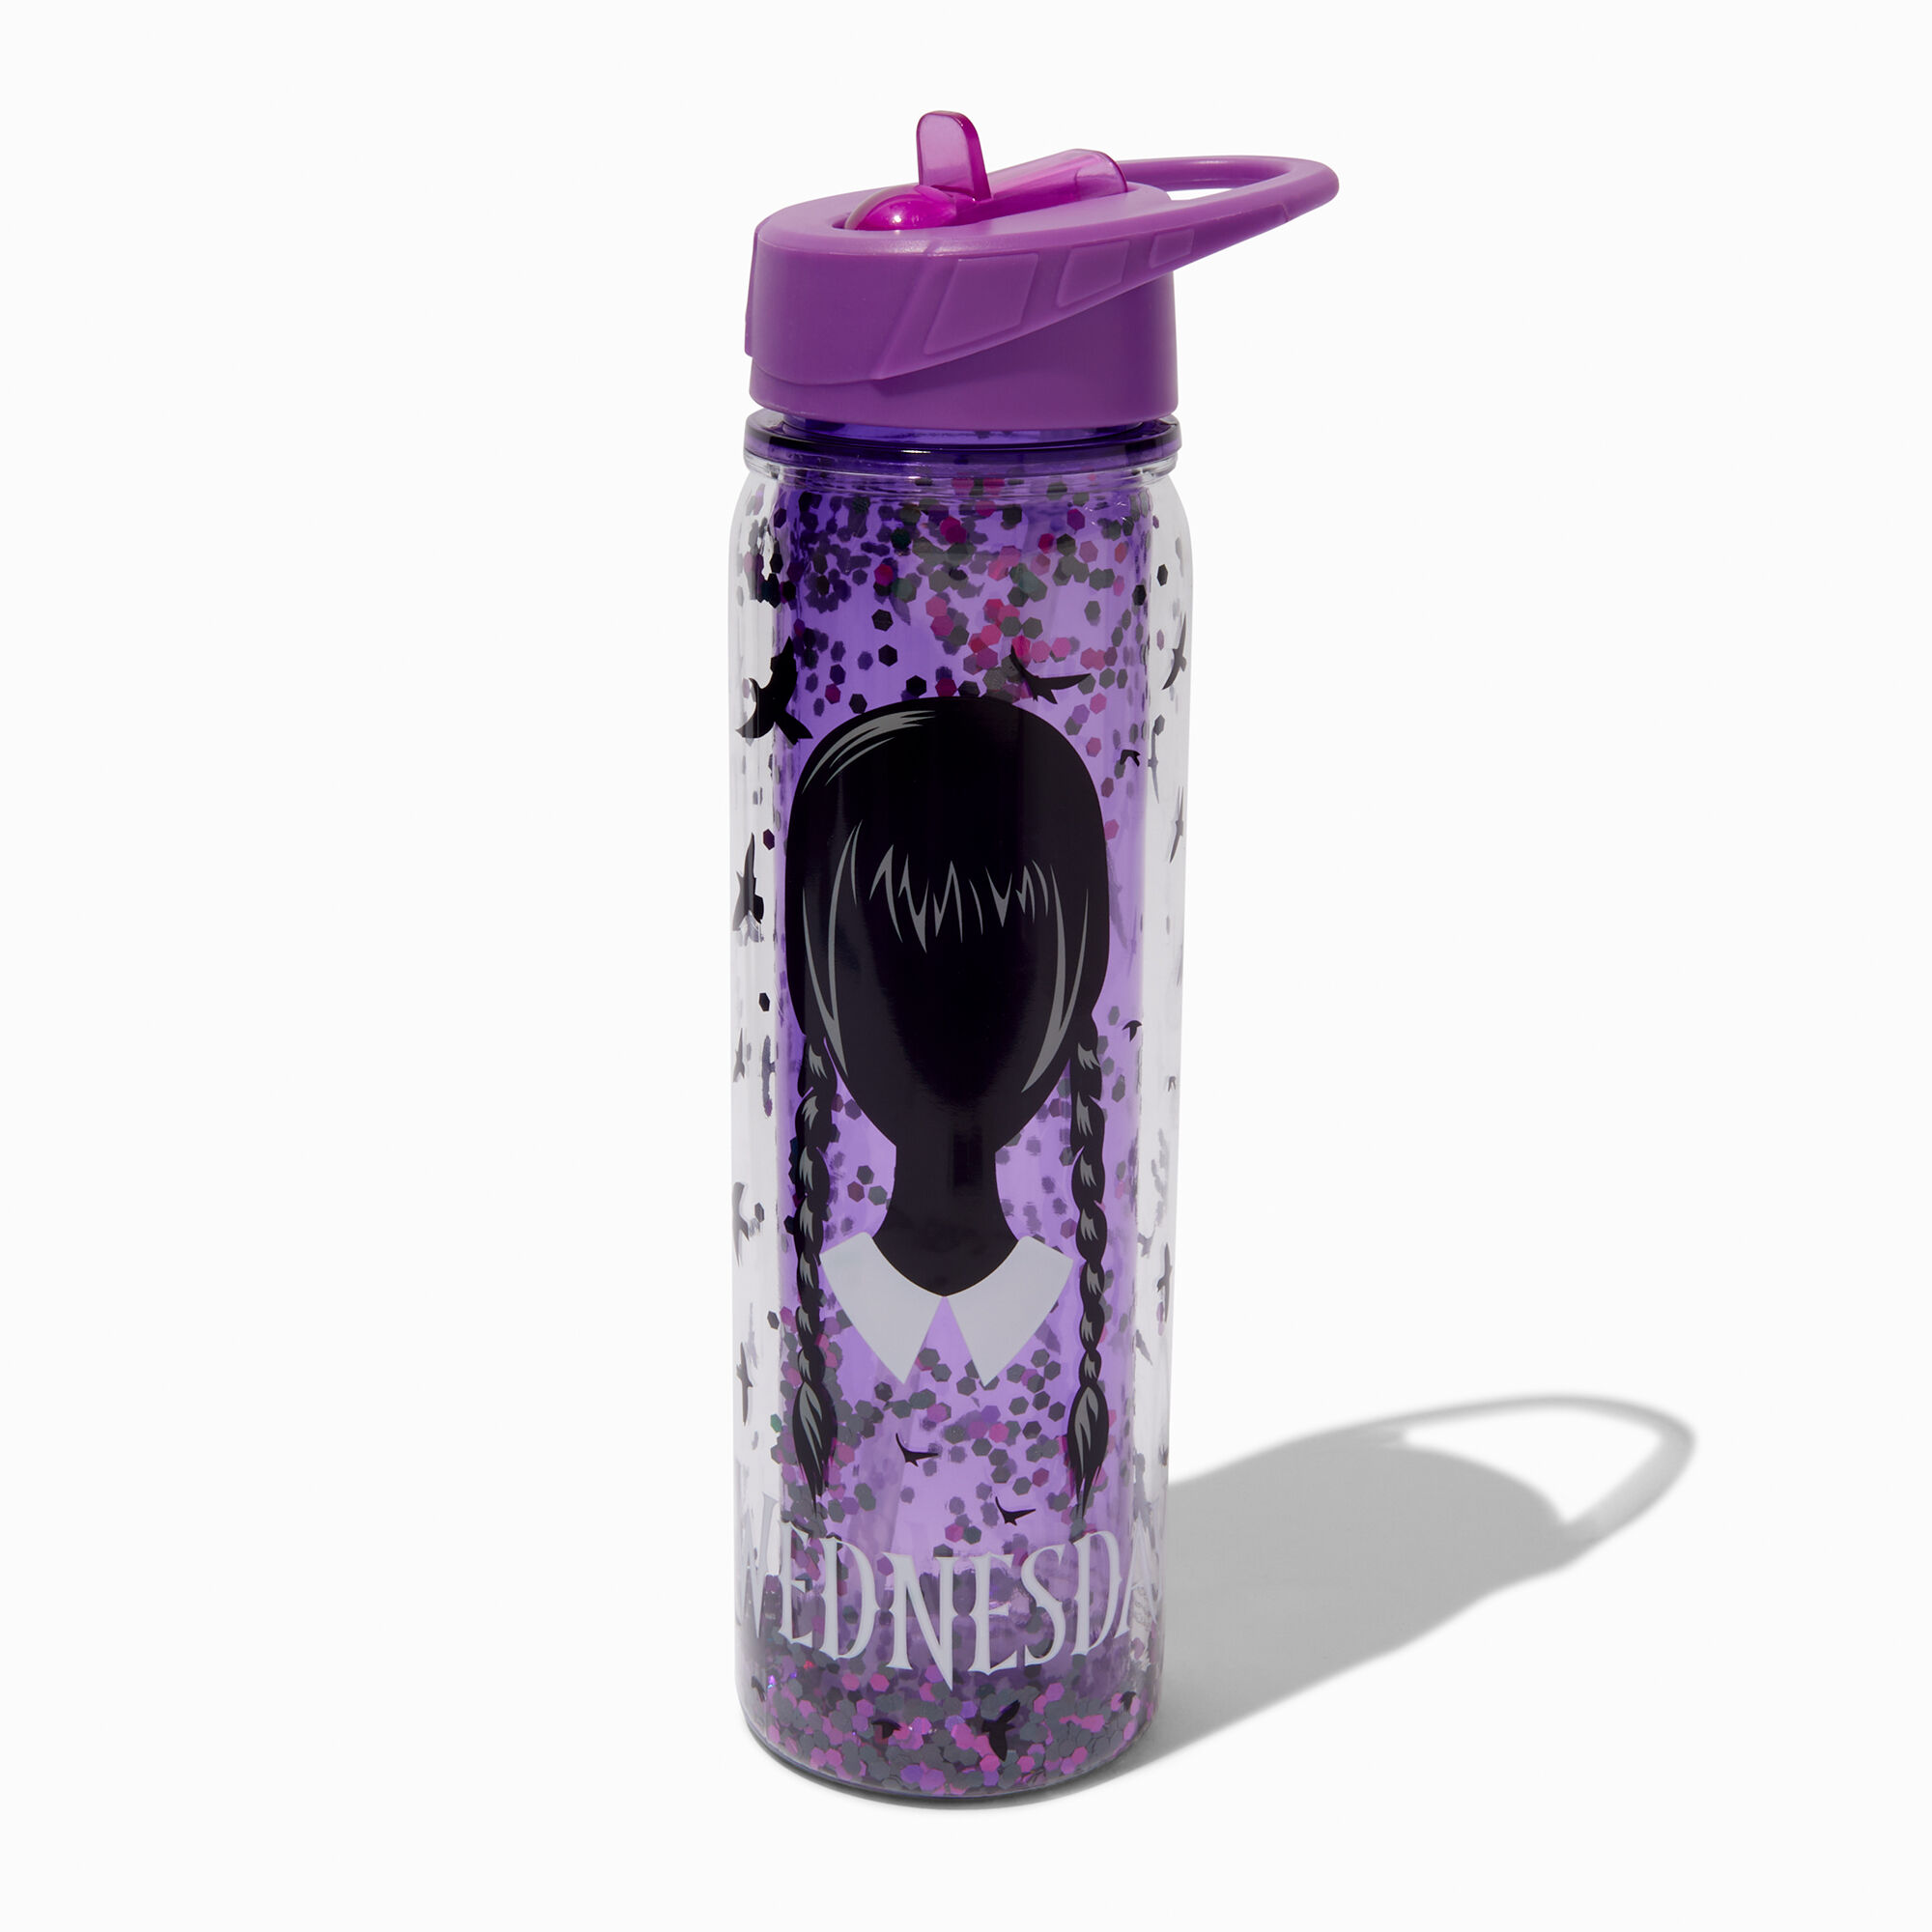 View Claires Wednesday Glitter Shaker Water Bottle information